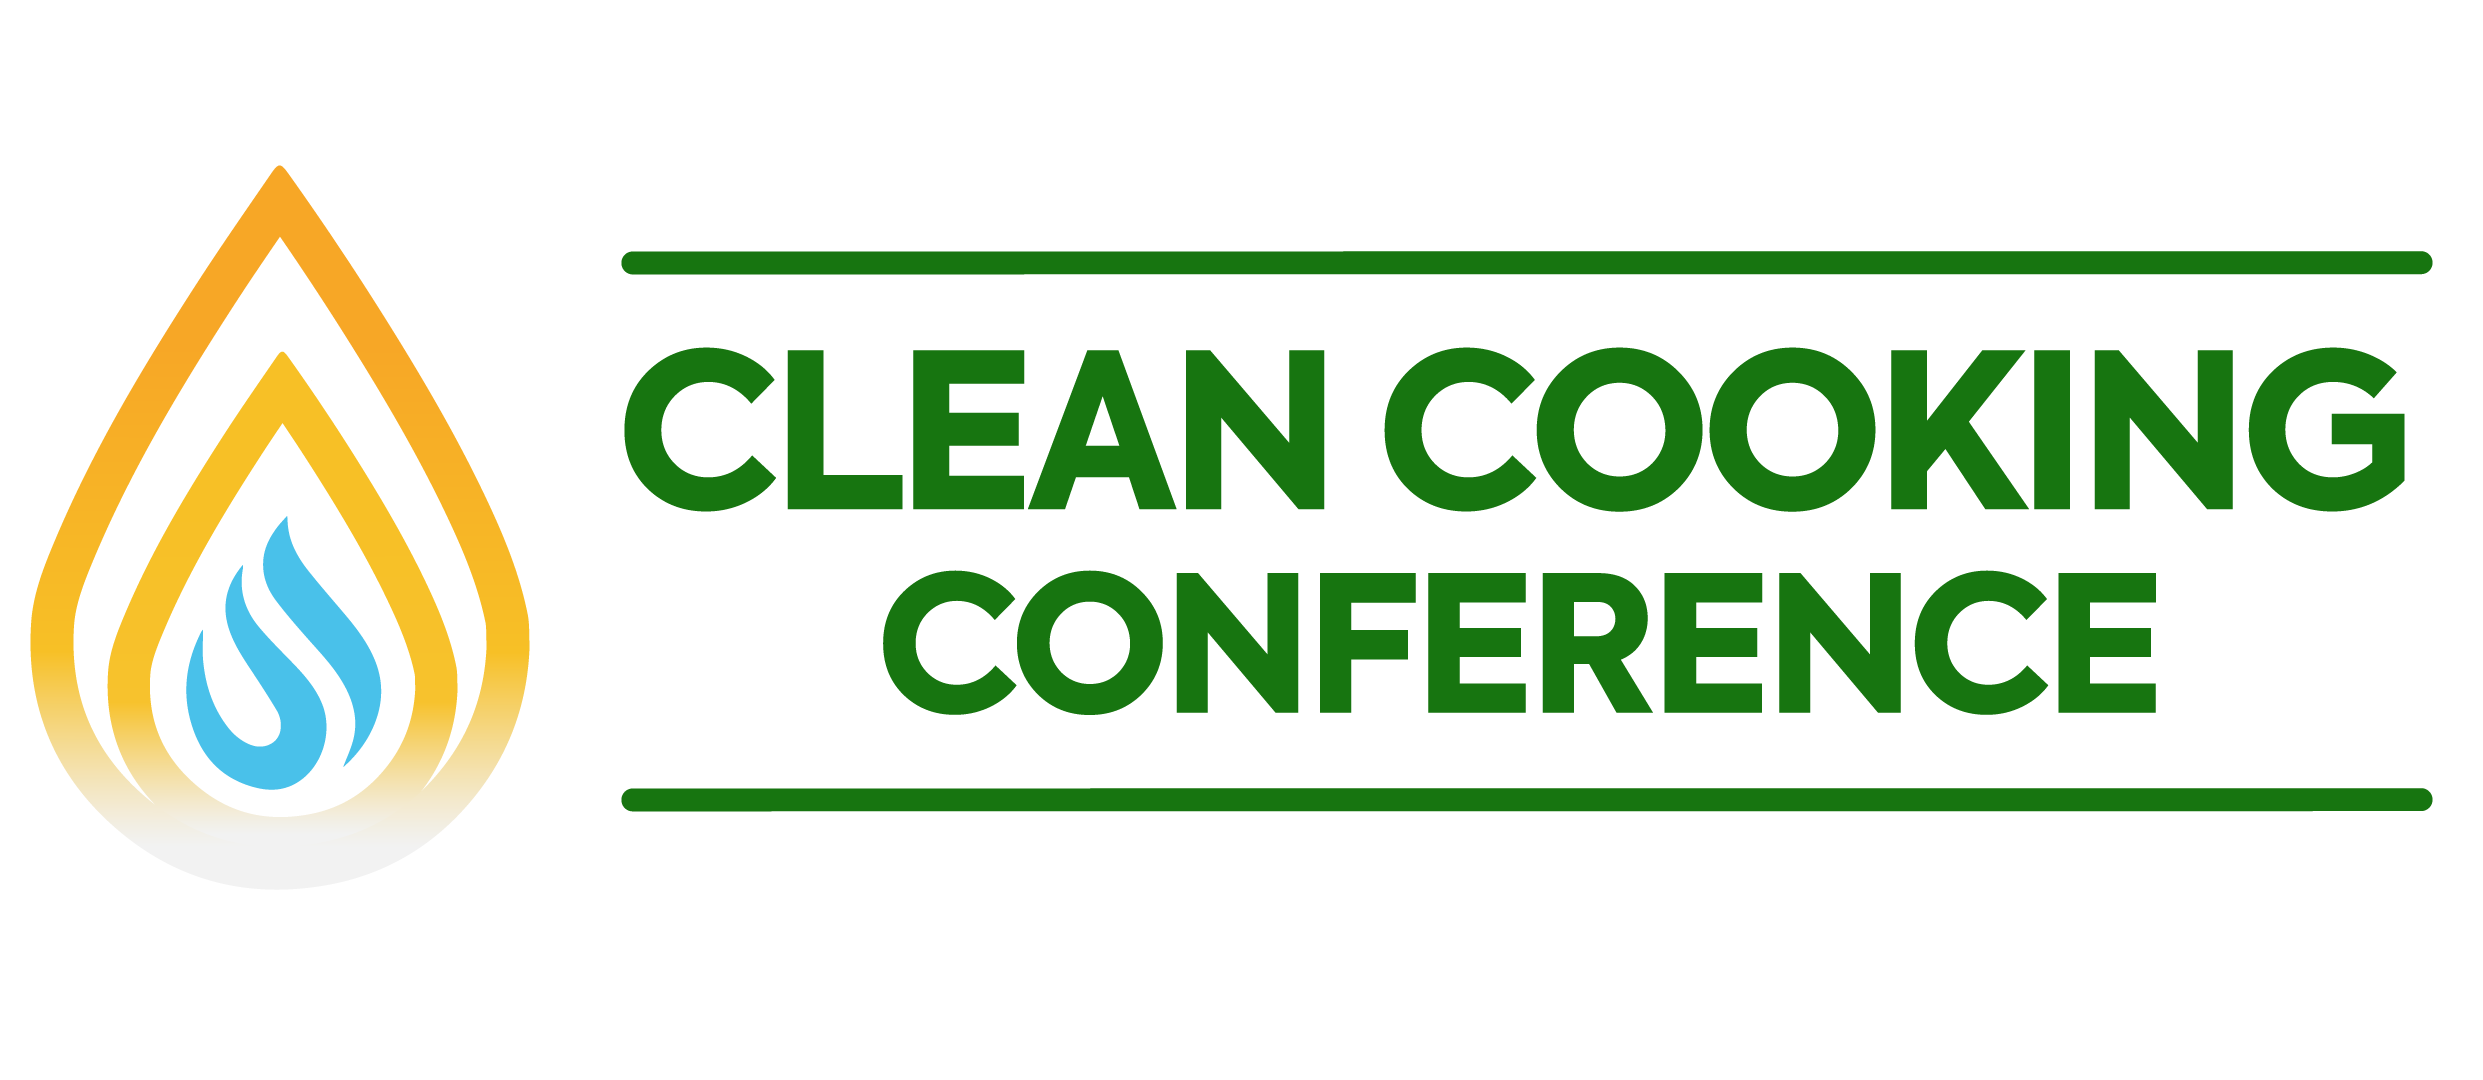 Clean Cooking Conference